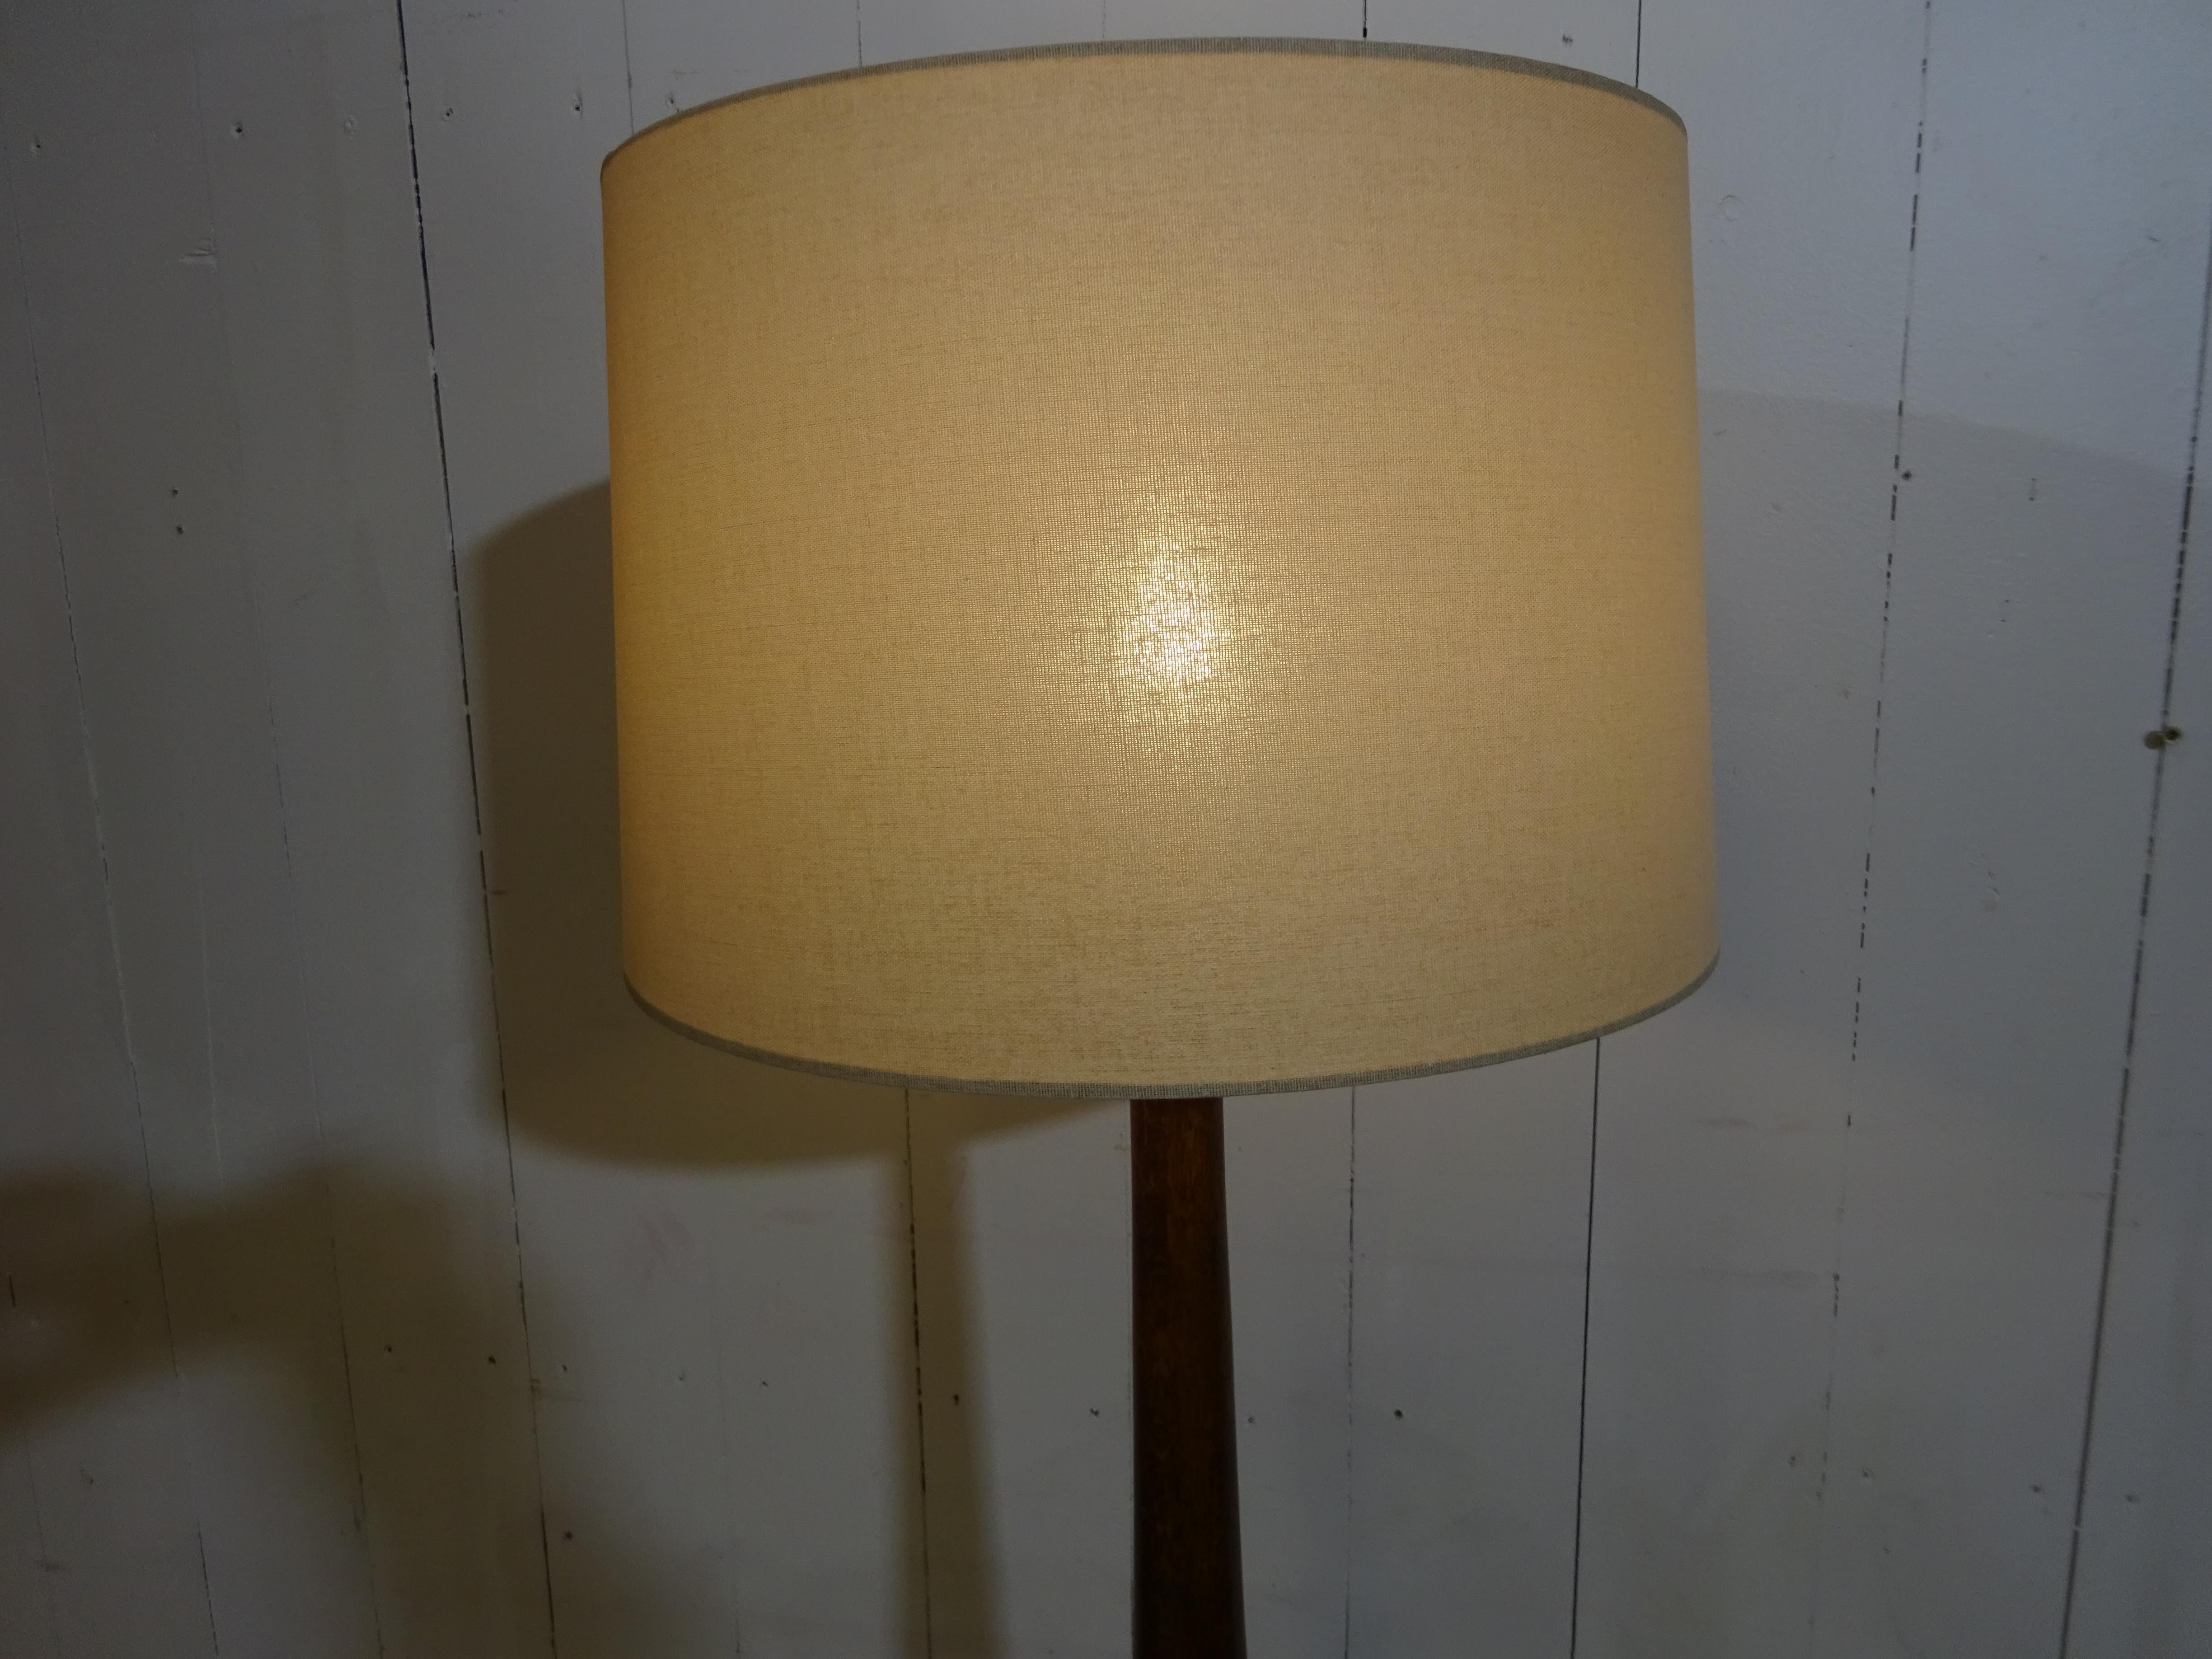 A design icon.

Original Art Deco standard lamp in lovely condition. Ideal for any room and a real statement piece. The quality and craftsmanship is something you just do not find today. Handcrafted the base is solid oak with lovely patina and